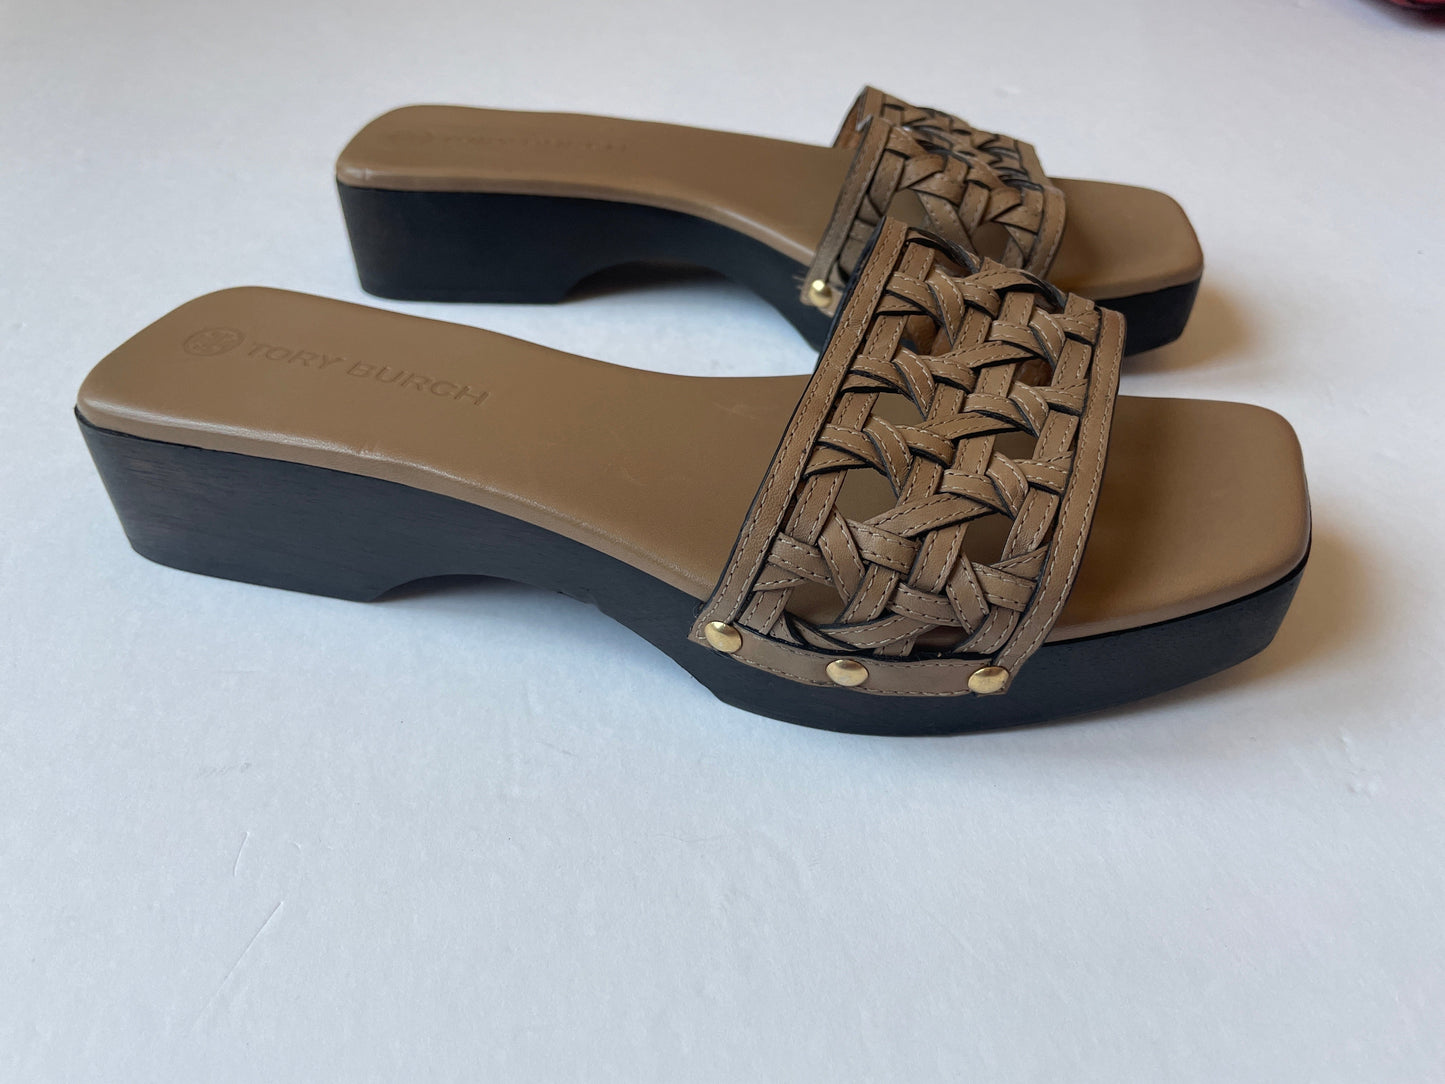 Sandals Flats By Tory Burch  Size: 9.5